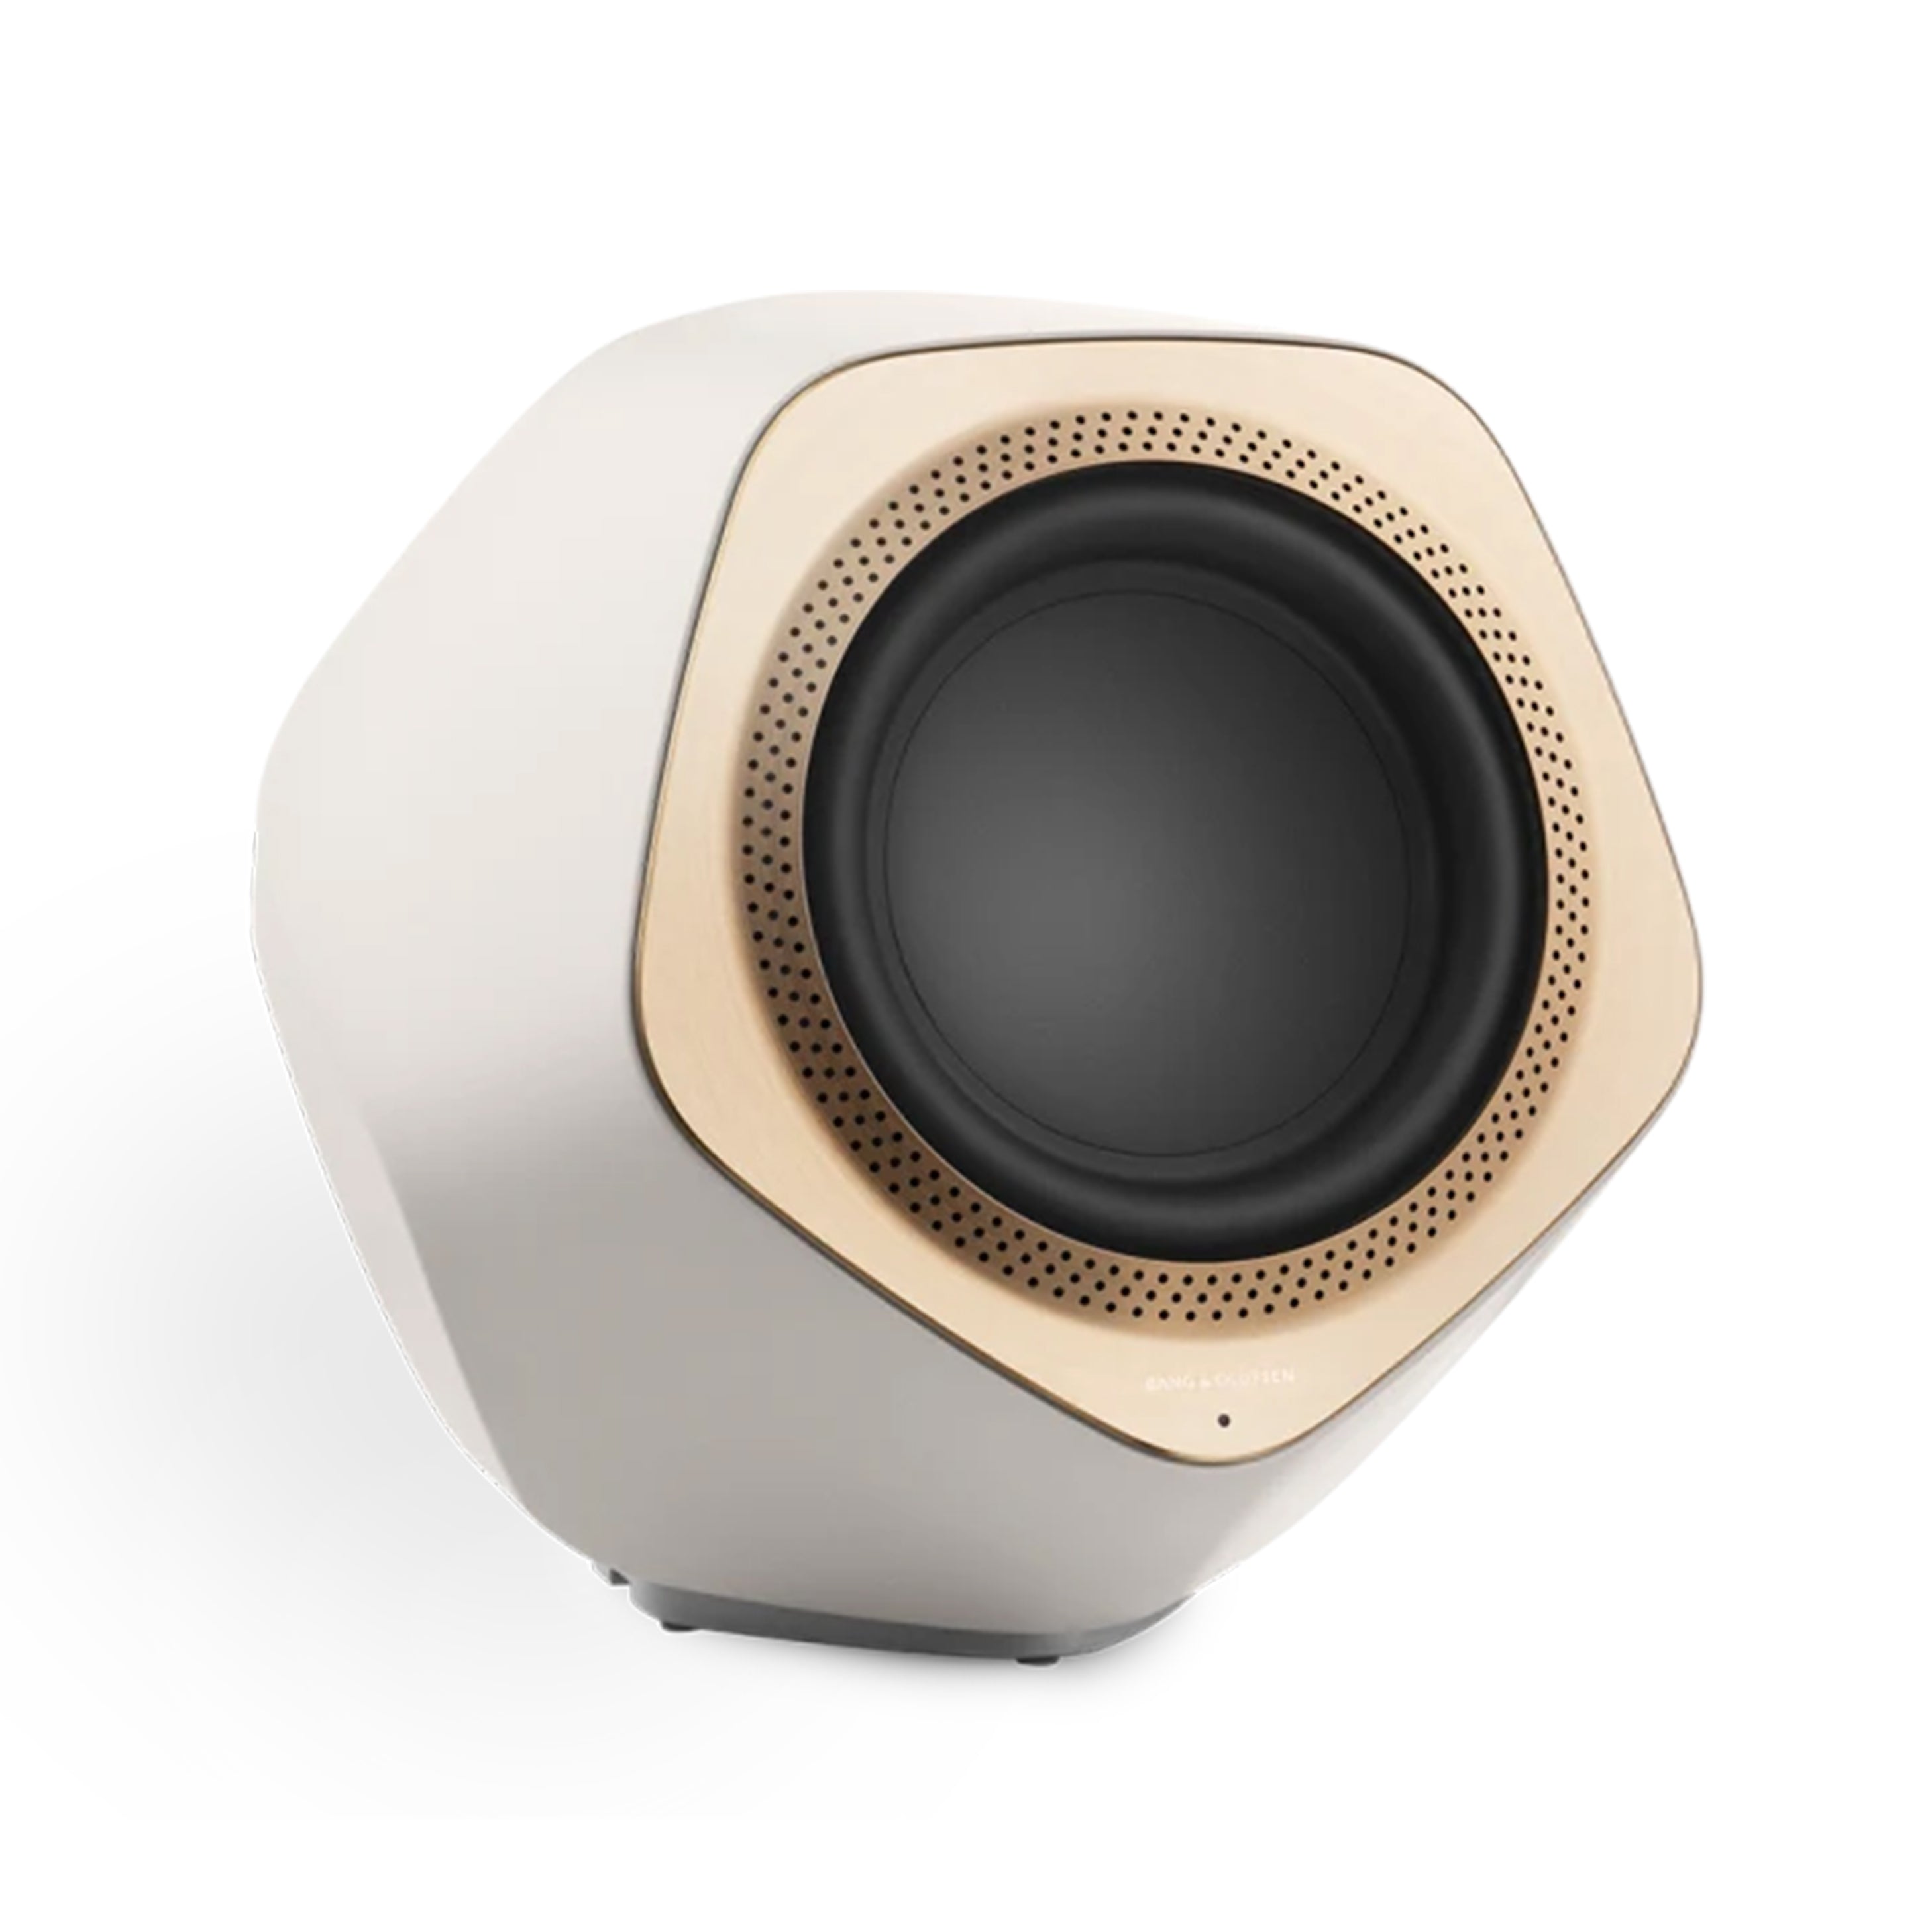 Bang & Olufsen BeoLab - Wireless Subwoofer (Brass Tone)